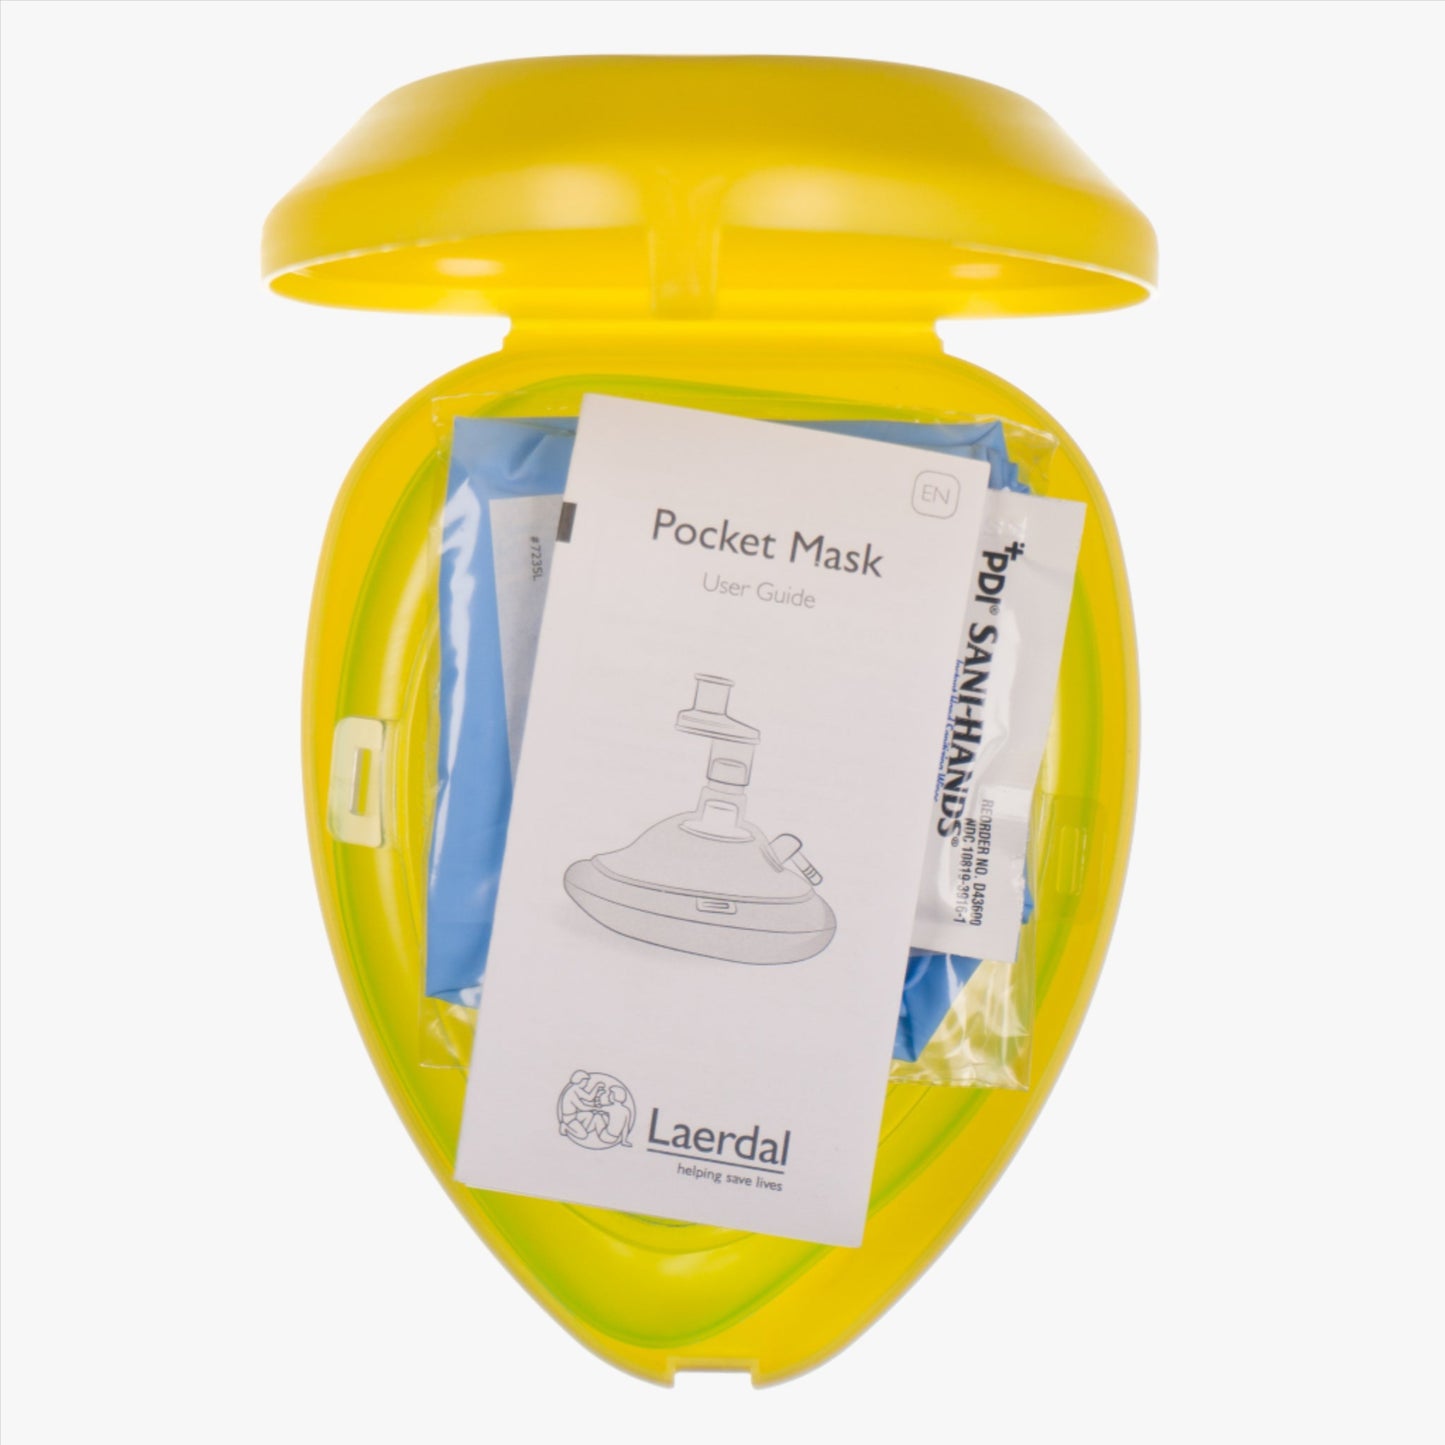 Laerdal Pocket mask with valve in box